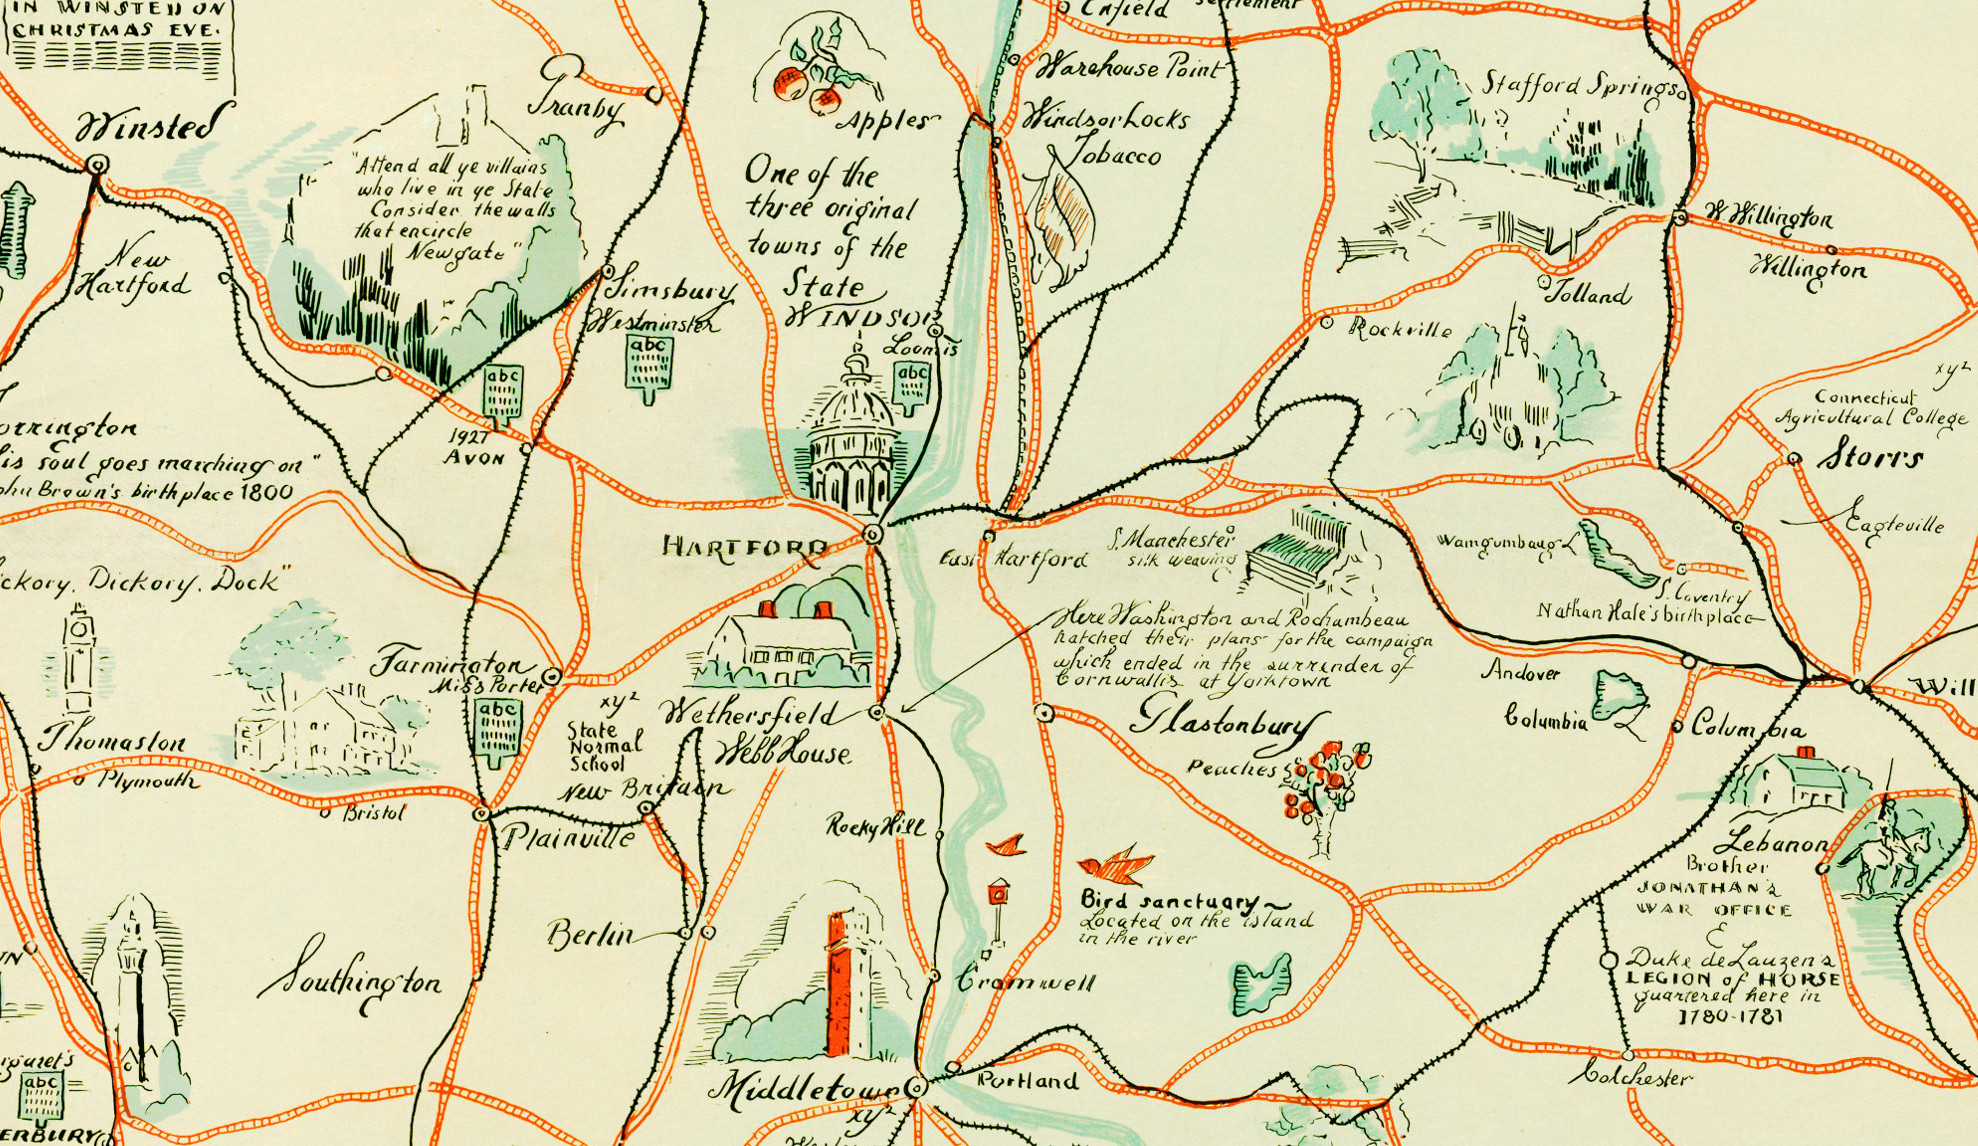 Amazingly illustrated old map of Connecticut from 1926